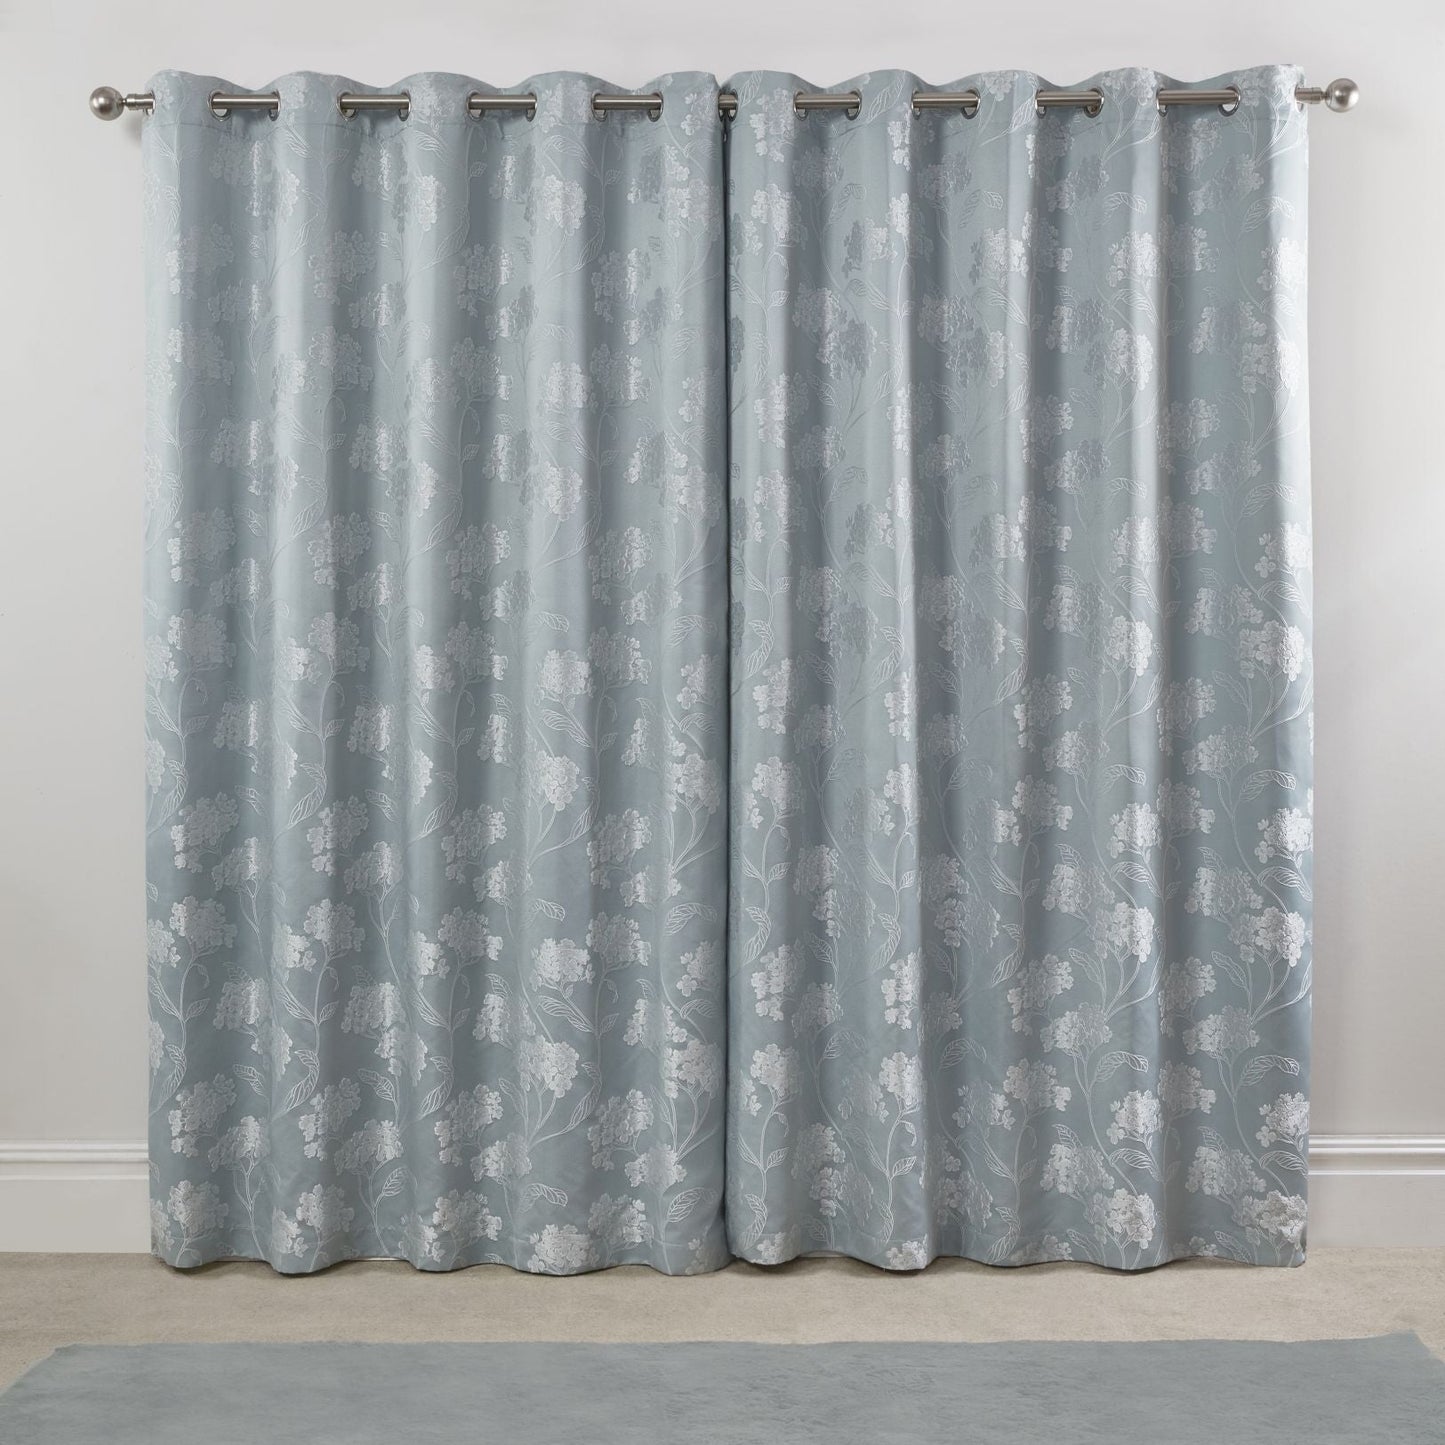 Blossom Duck Egg Lined Eyelet Jacquard Curtains